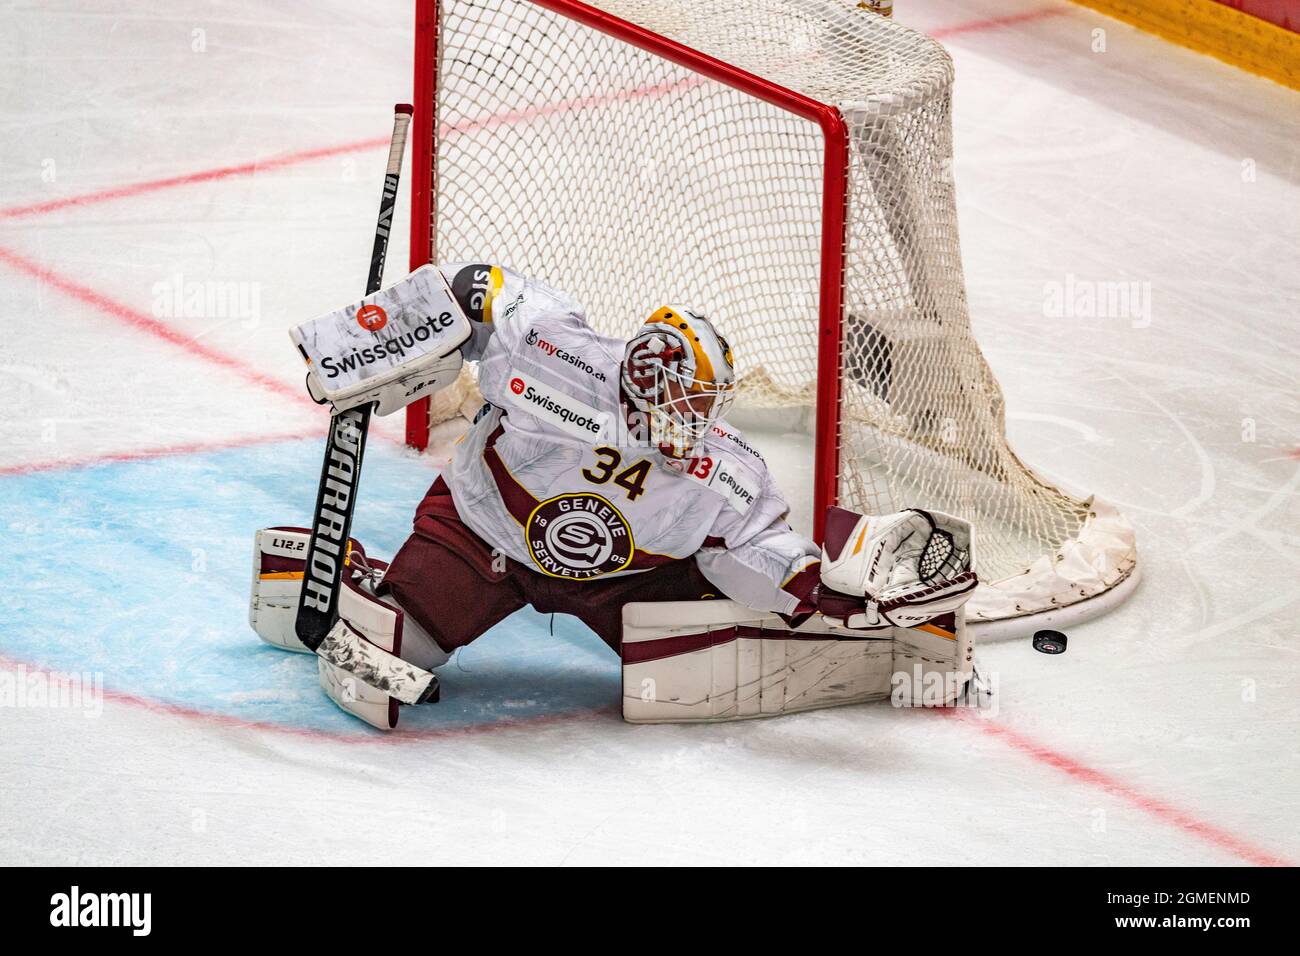 Lausanne Switzerland, 09/17/2021: Gauthier Descloux (goalkeeper) of Geneva-Servette Hc is in action during the 5th match of the 2021-2022 Swiss National League Season with the Lausanne Hc and Geneva-Servette Hc (Photo by Eric Dubost / Pacific Press/Sipa USA) Stock Photo